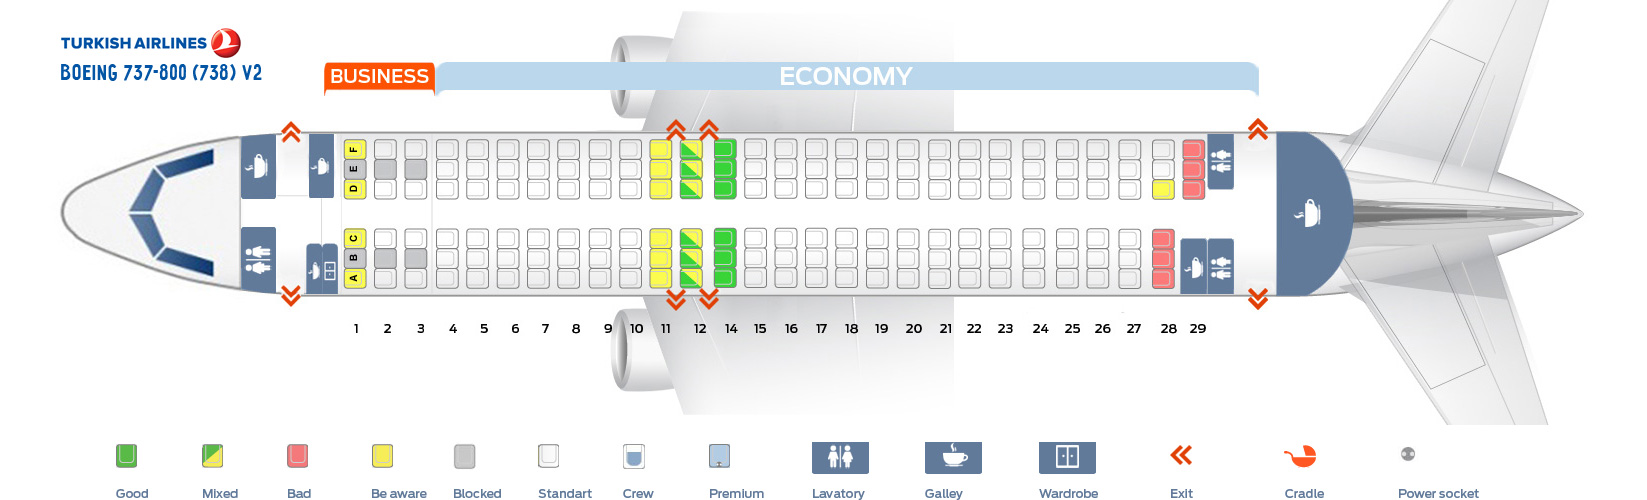 Seat Map Boeing 737 800 Turkish Airlines Best Seats In The